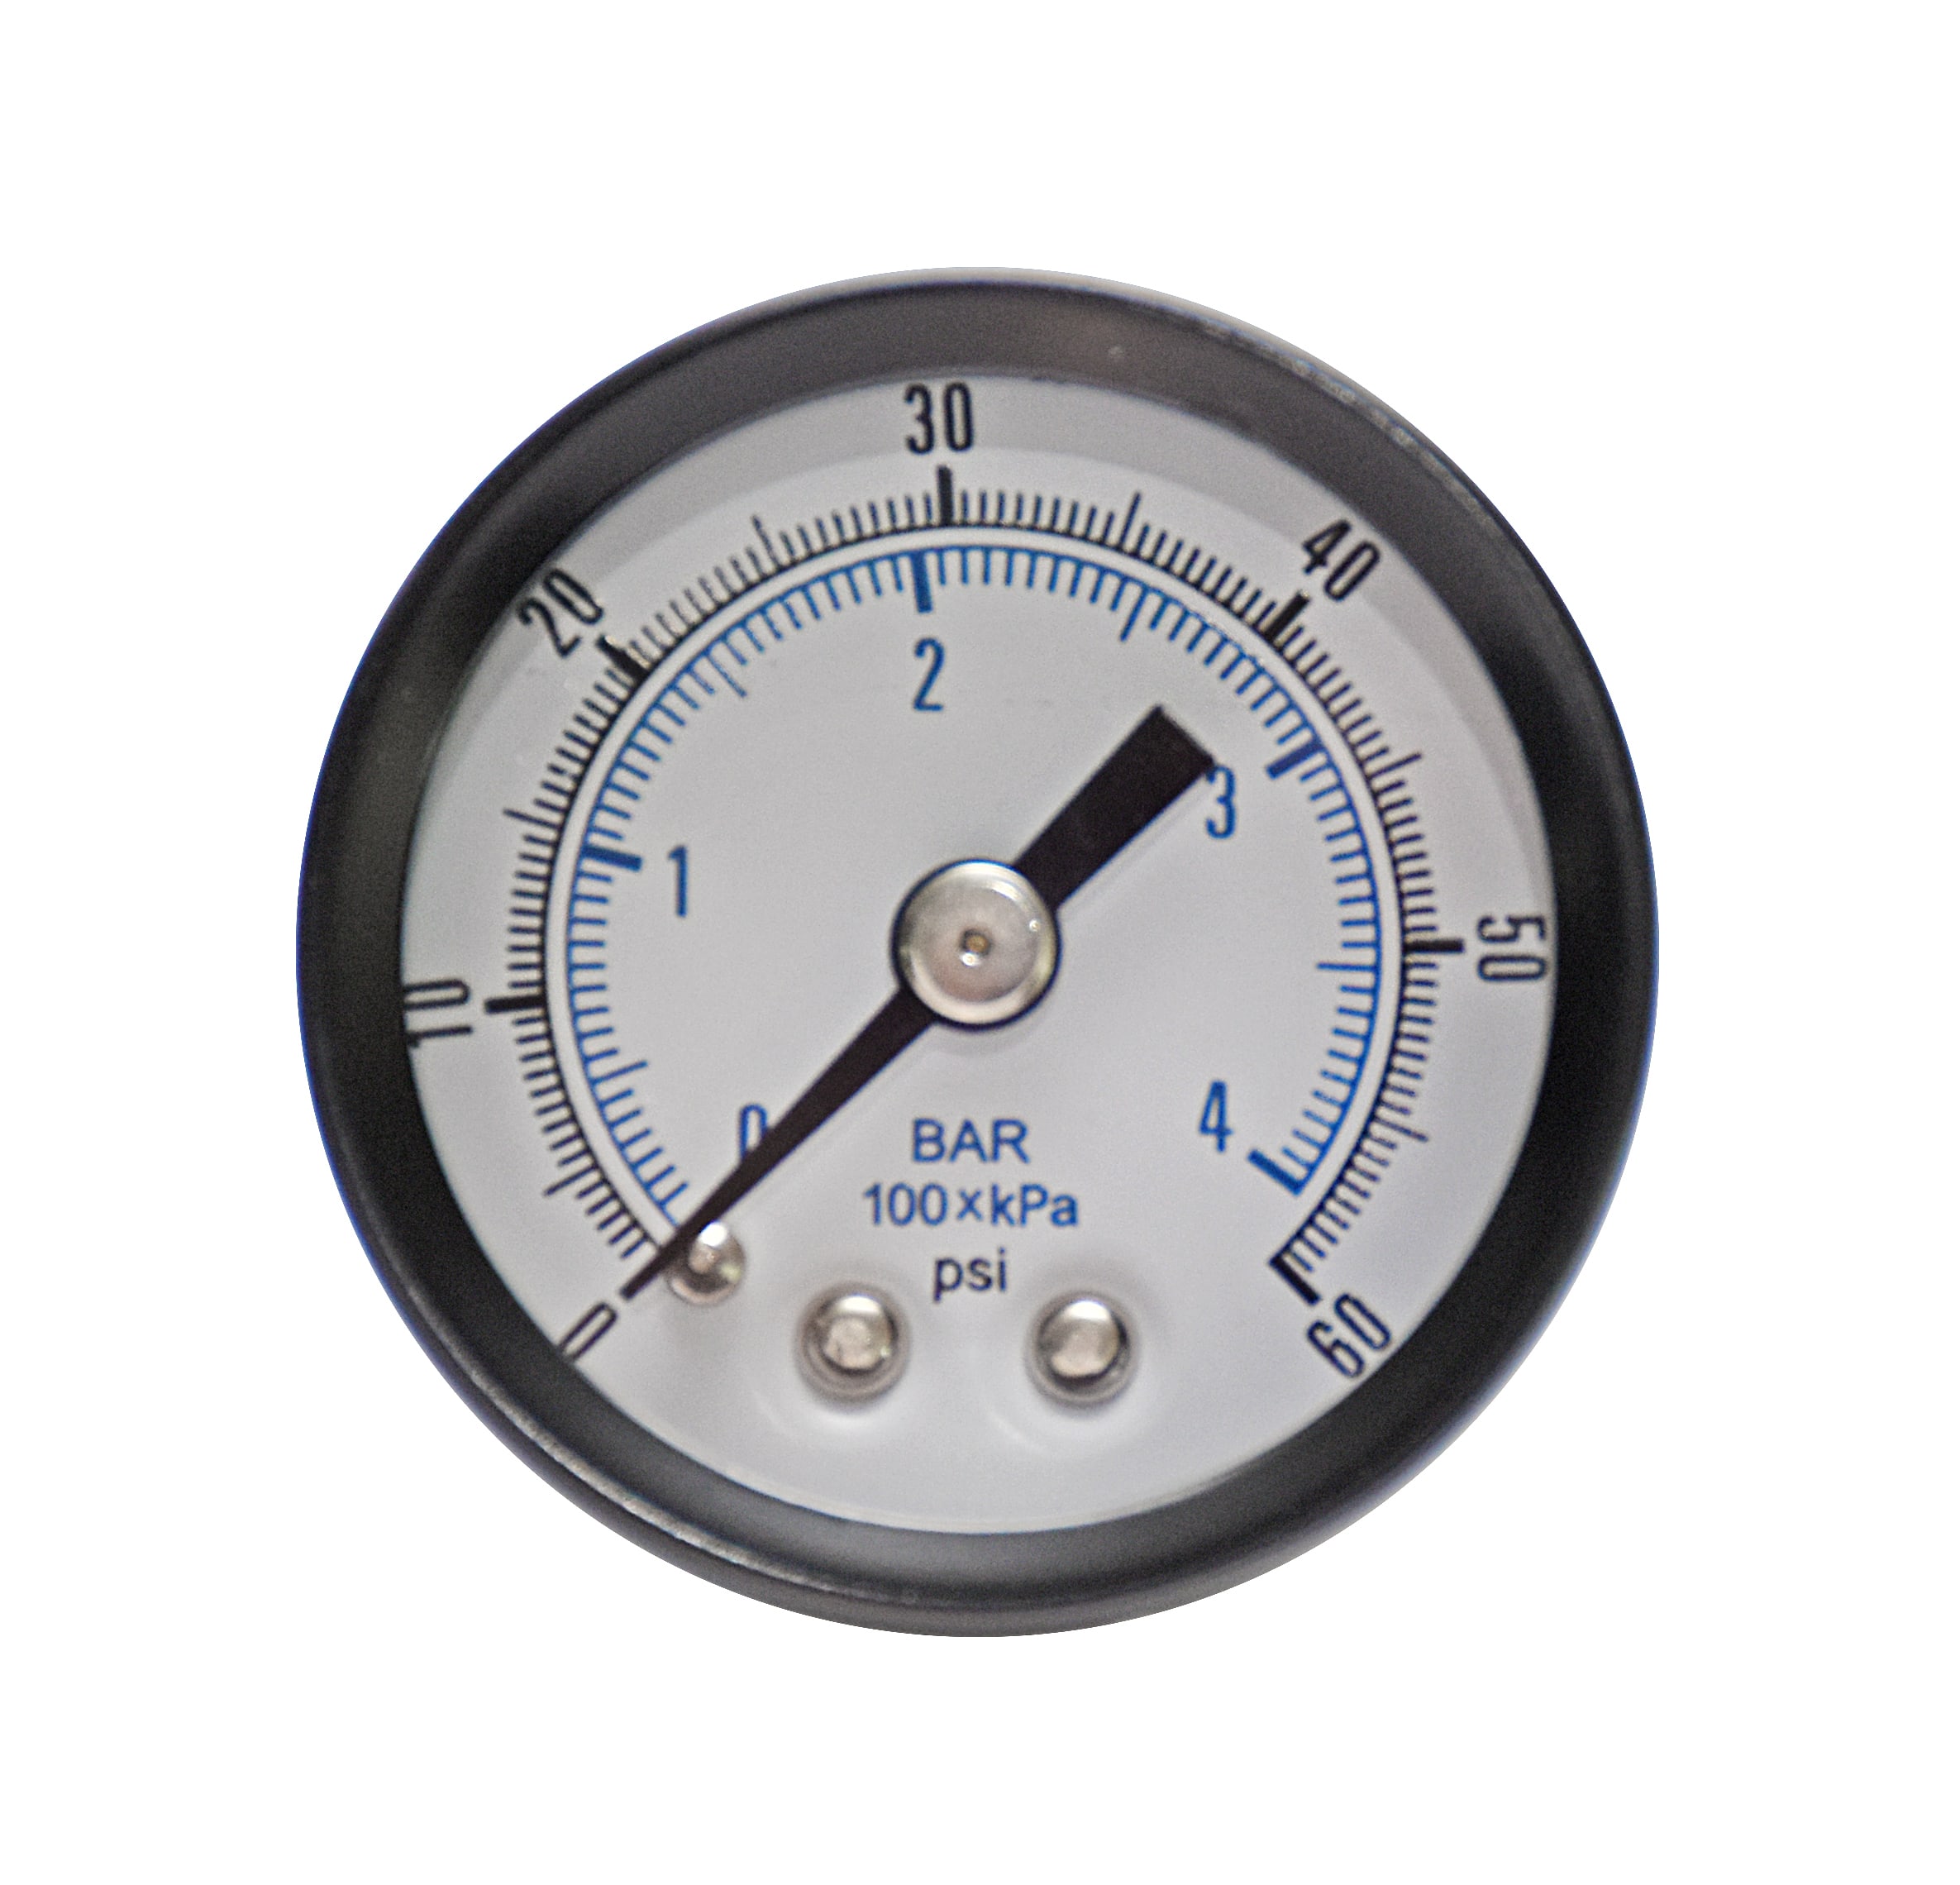 PIC Gauge 302D-204E 2 Dial 0/100 psi Range 1/4 Male NPT Connection Size and Polycarbonate Lens 1/4 Male NPT Connection Size PIC Gauges Center Back Mount Dry Pressure Gauge with a Stainless Steel Case and Internals Stainless Steel Bezel 